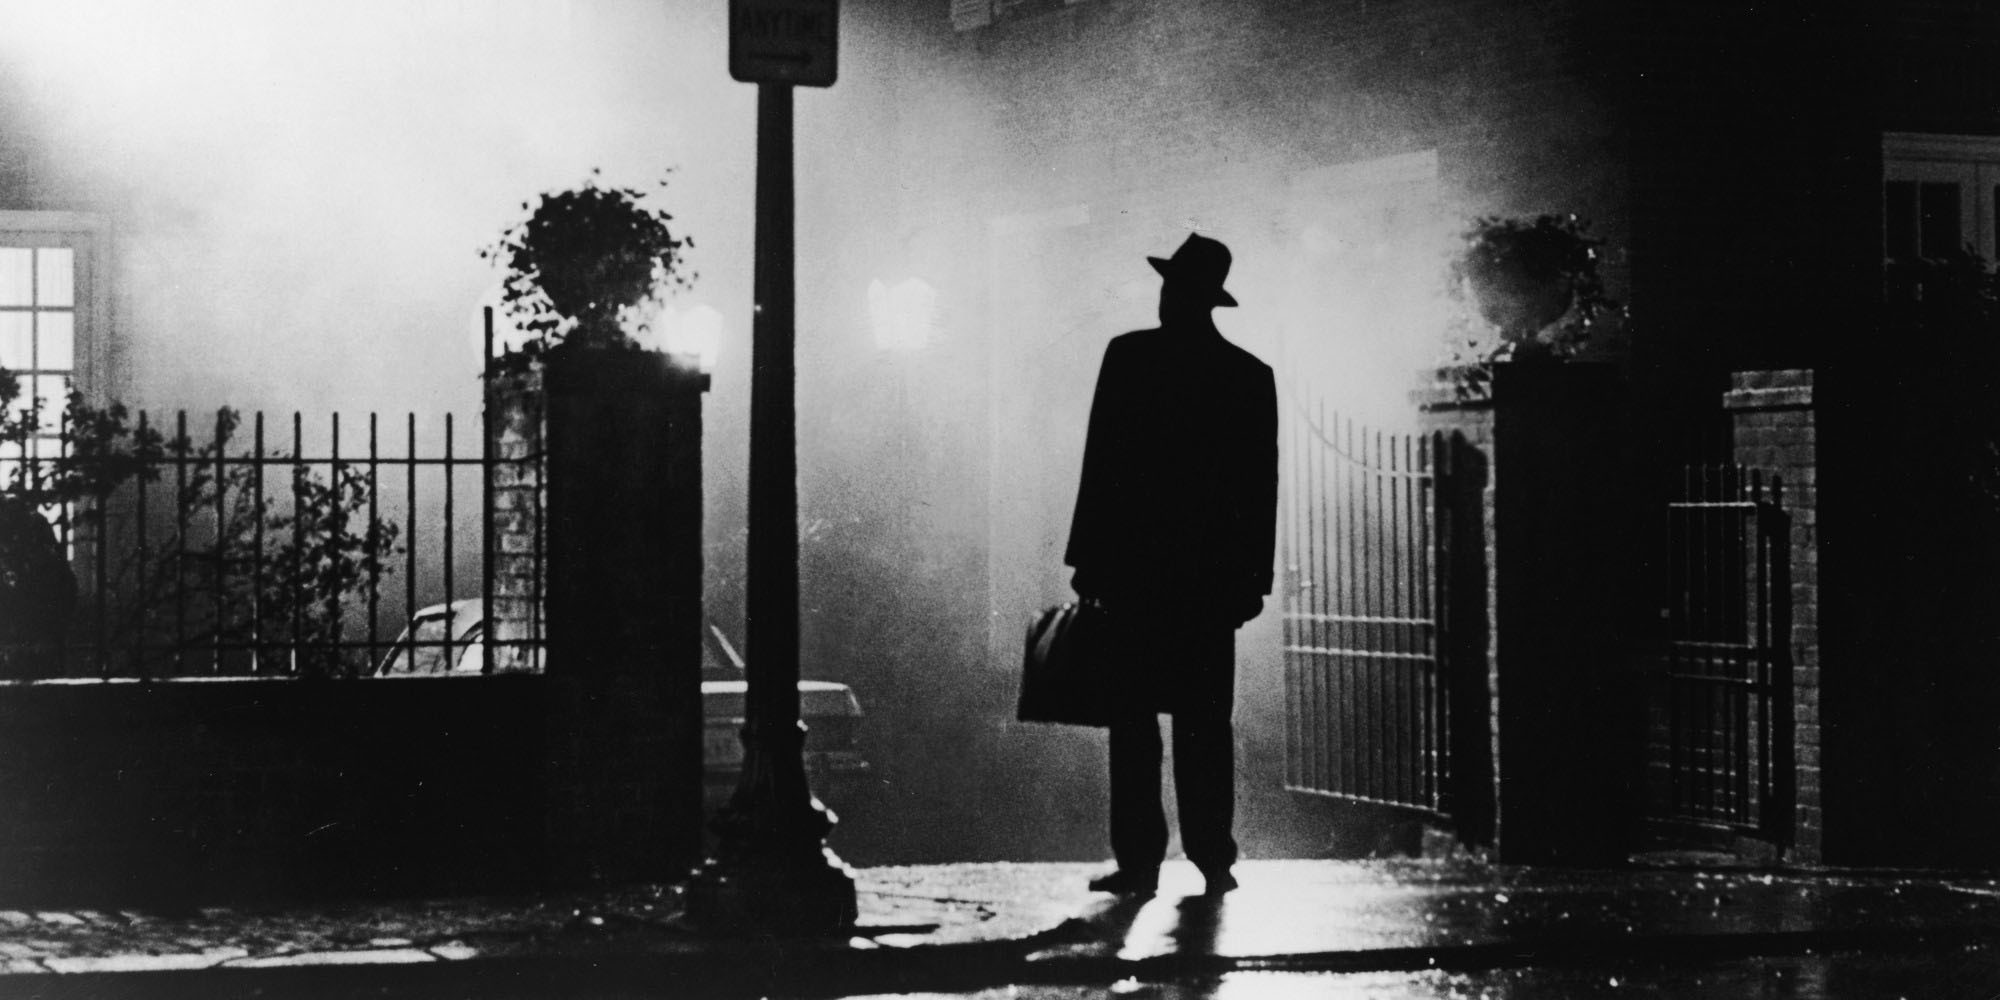 Image result for the exorcist